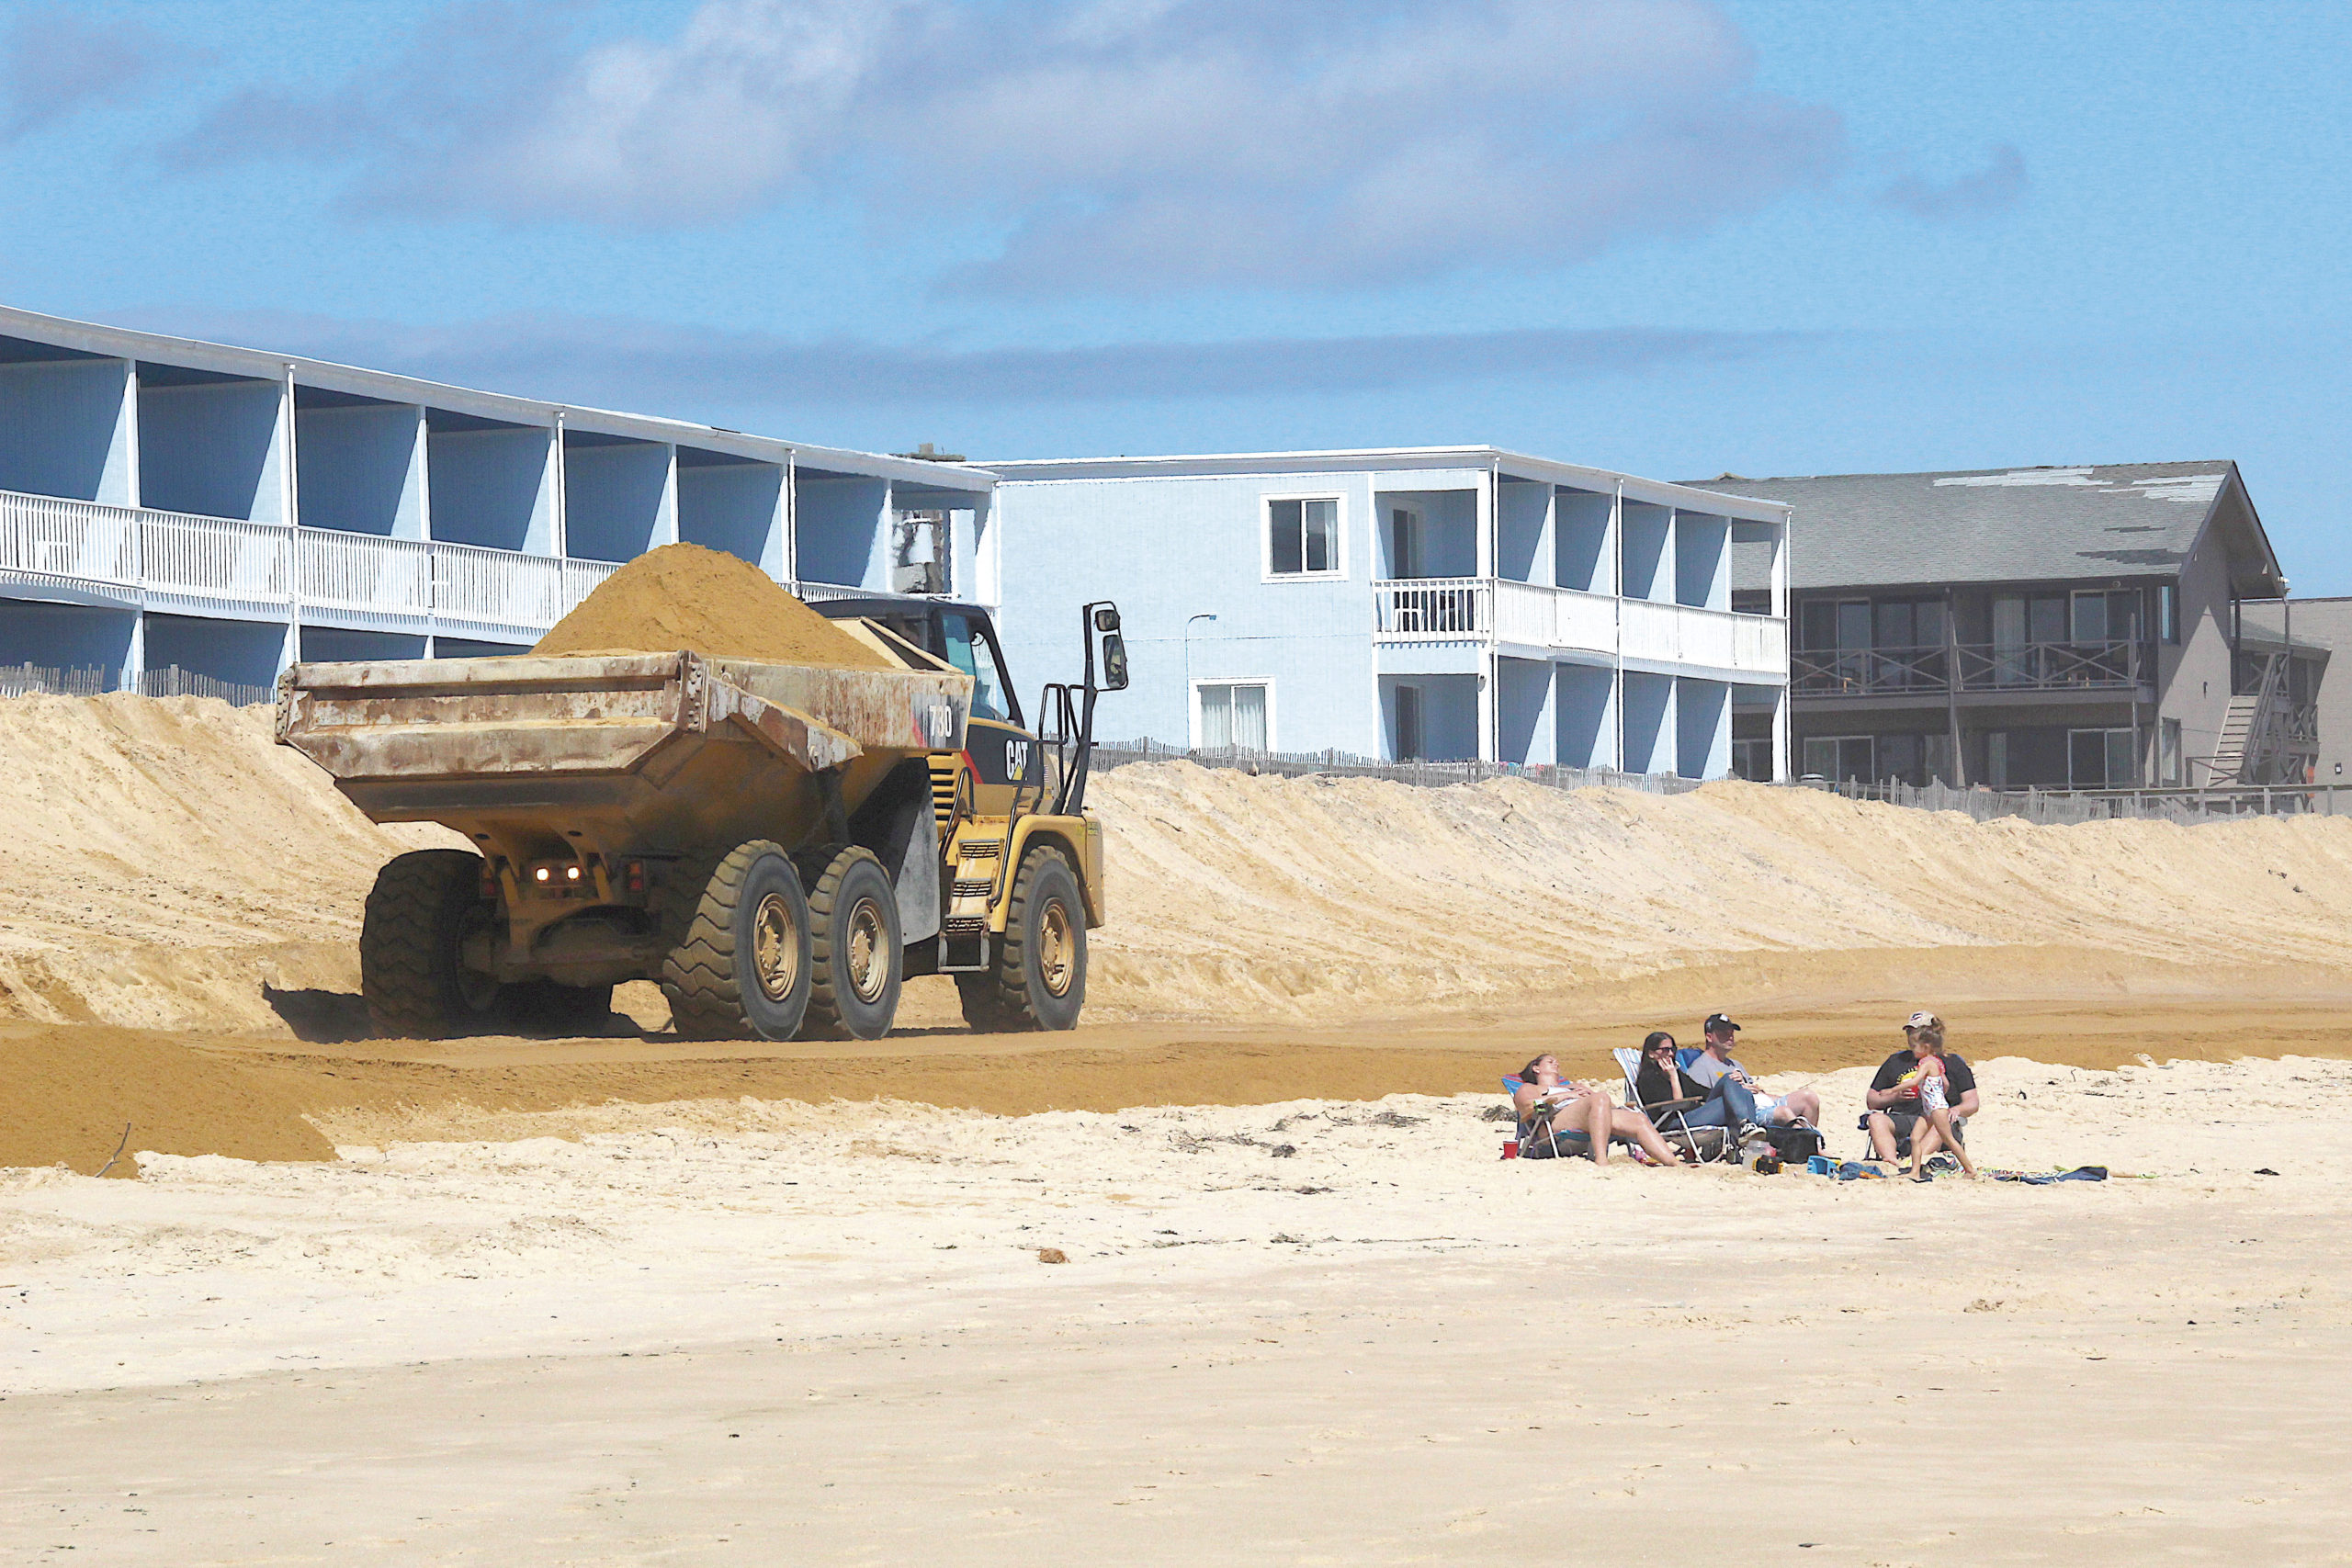 Rites of Spring 
April 24 -- The ocean beach in downtown Montauk was rebuilt in preparation for summer 2019, as it had been in previous years. East Hampton Town had more than 50,000 tons of sand trucked in to cover sandbags intended to protect oceanfront hotels and other properties, at a cost of slightly more than $1 million to be split between the town and Suffolk County.